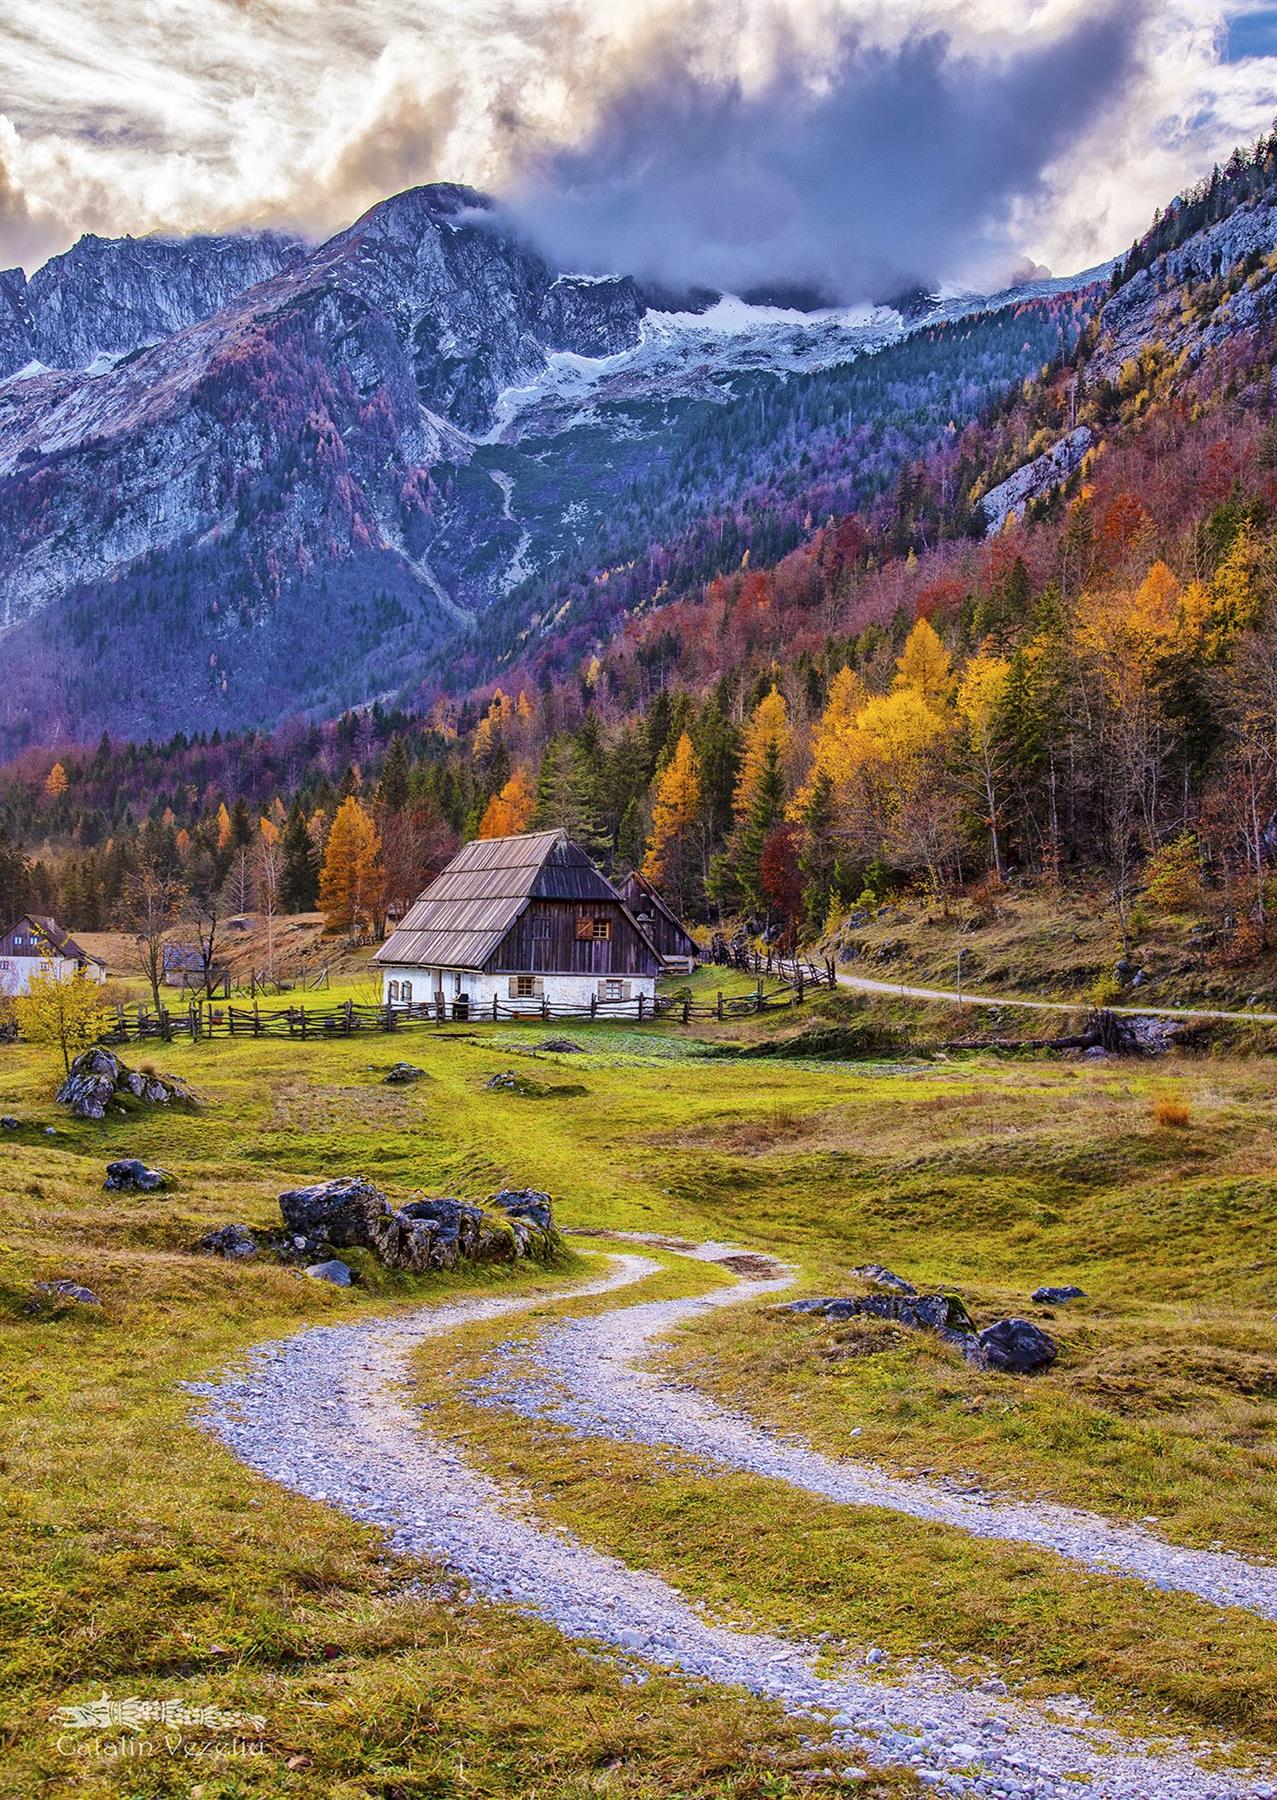 Enjoy Cottage in the Mountains Jigsaw Puzzle (1000 Pieces)